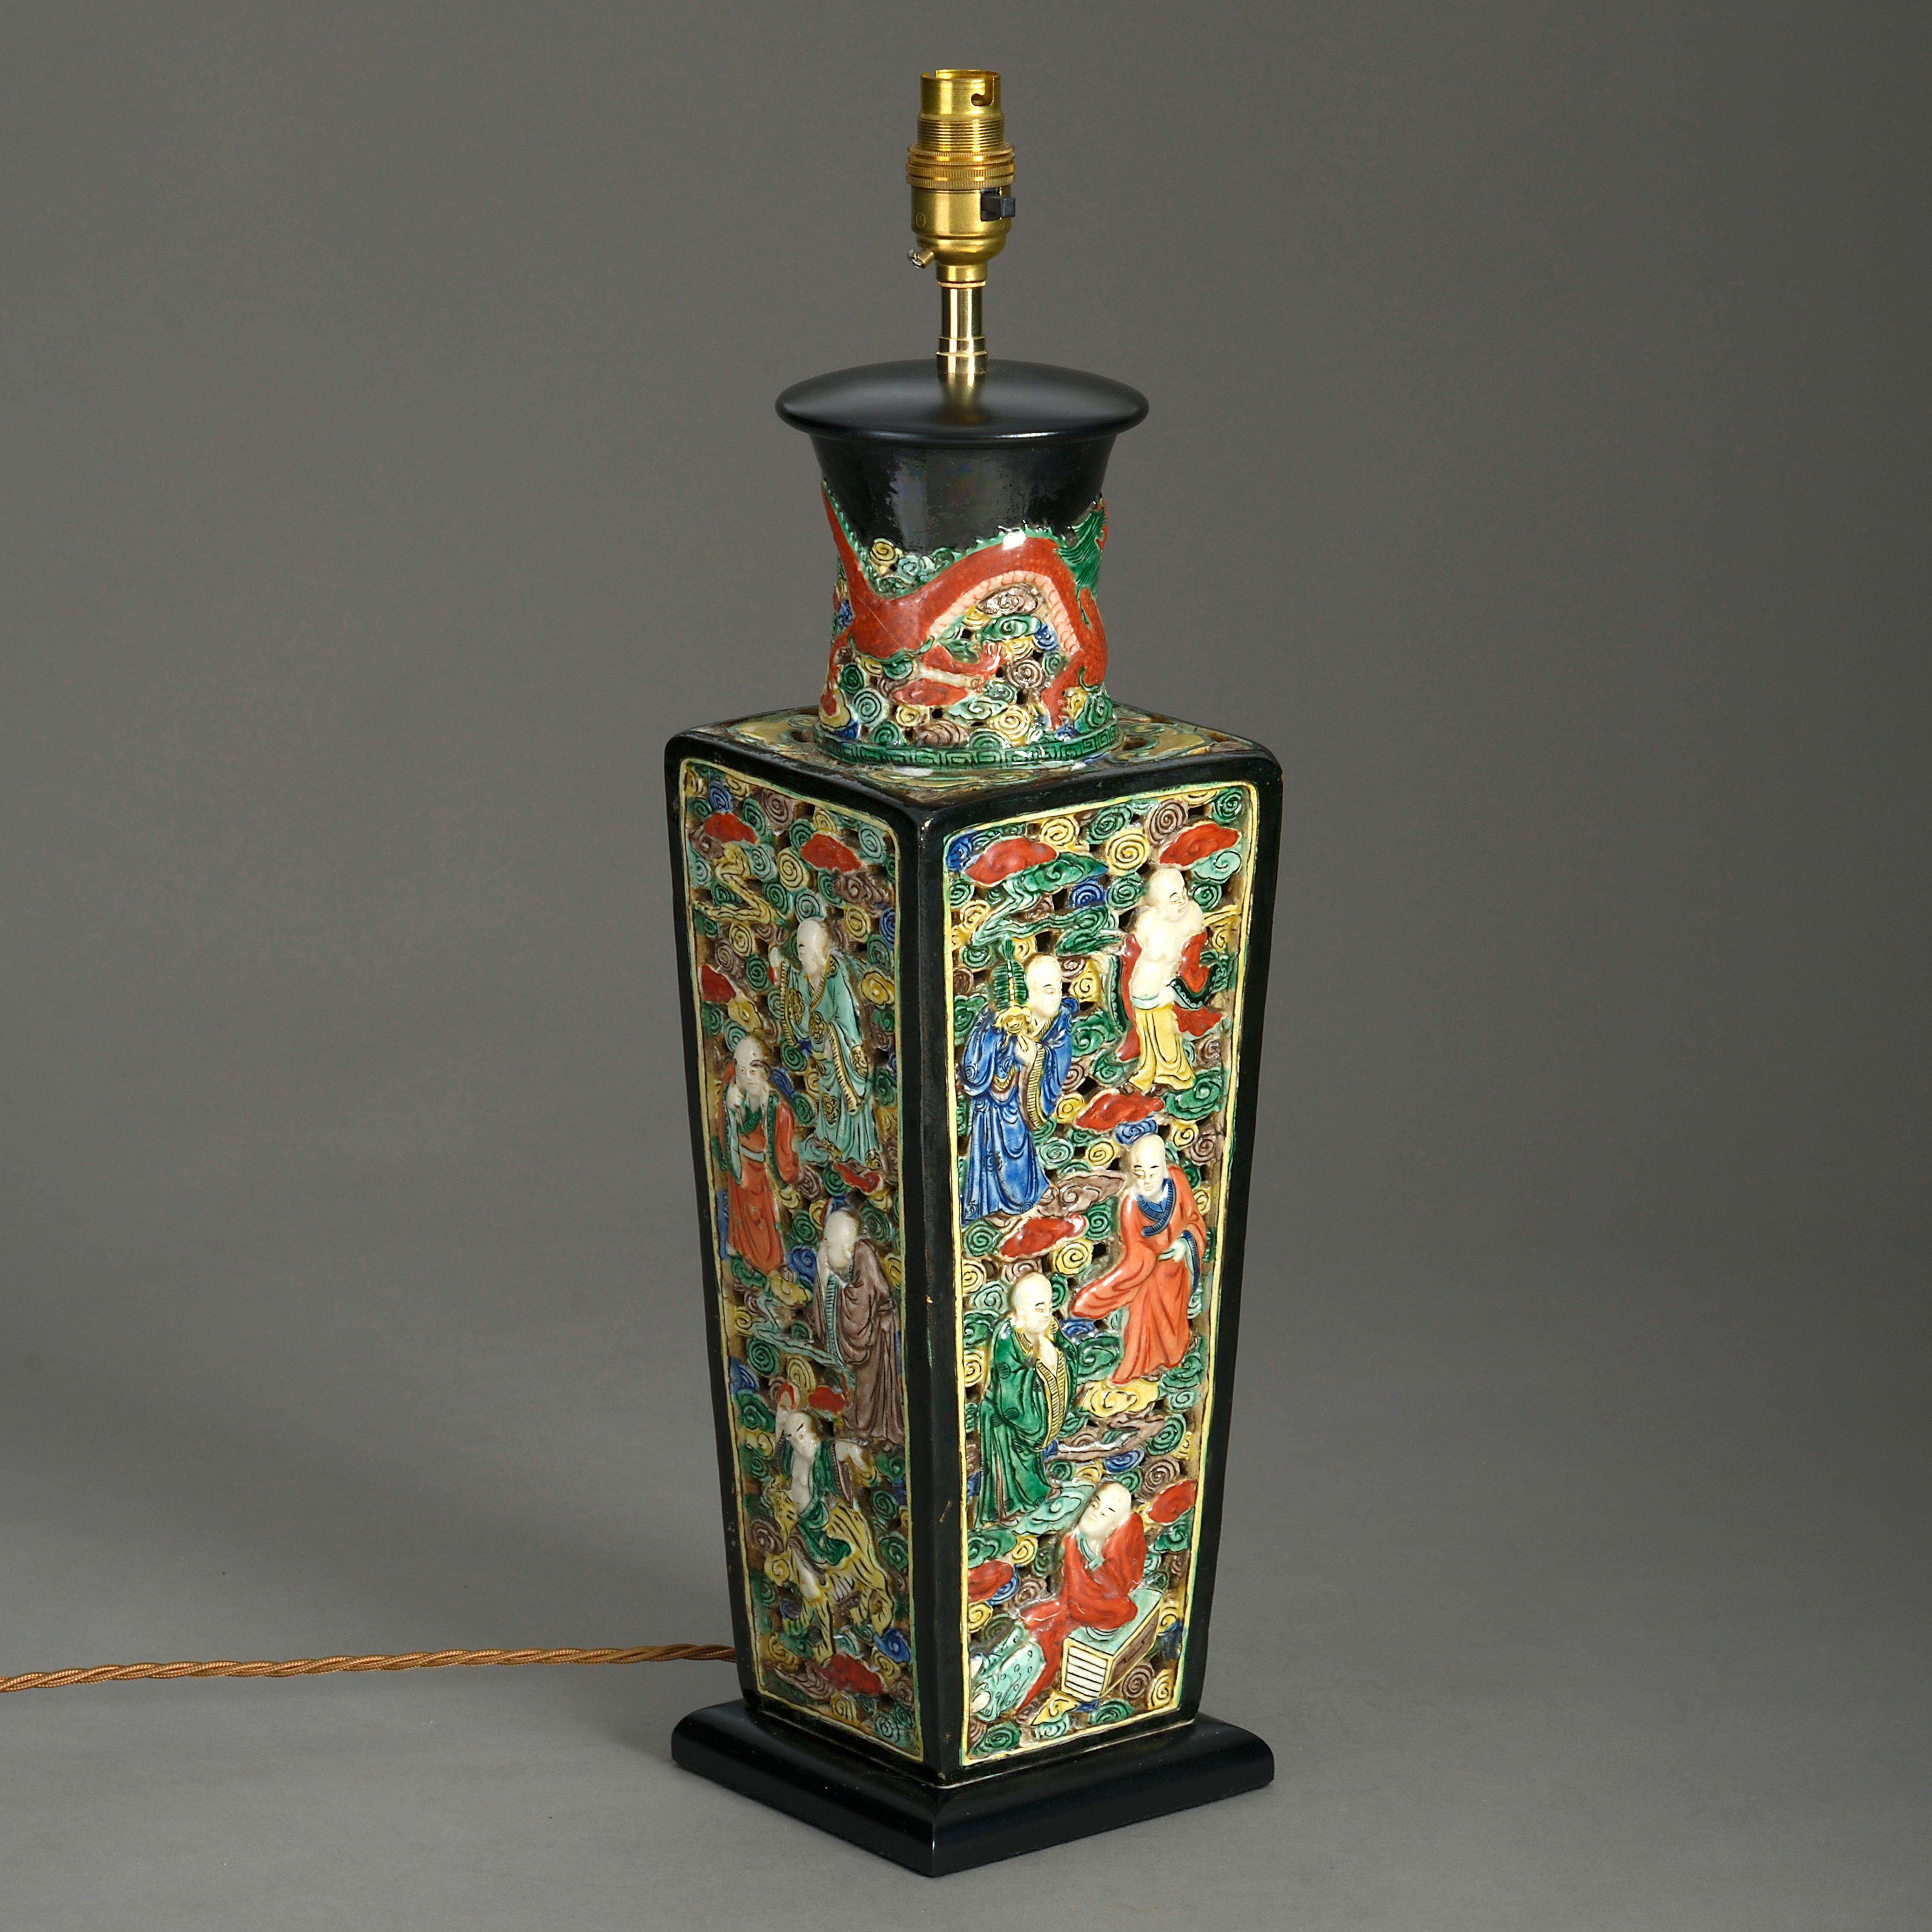 A mid-19th century polychrome vase of square tapering form, the black glazed neck with dragon motifs, the sides intricately worked with figurative scenes upon a pierced scrolling ground. Now mounted as a table lamp.

Wired for electric lighting